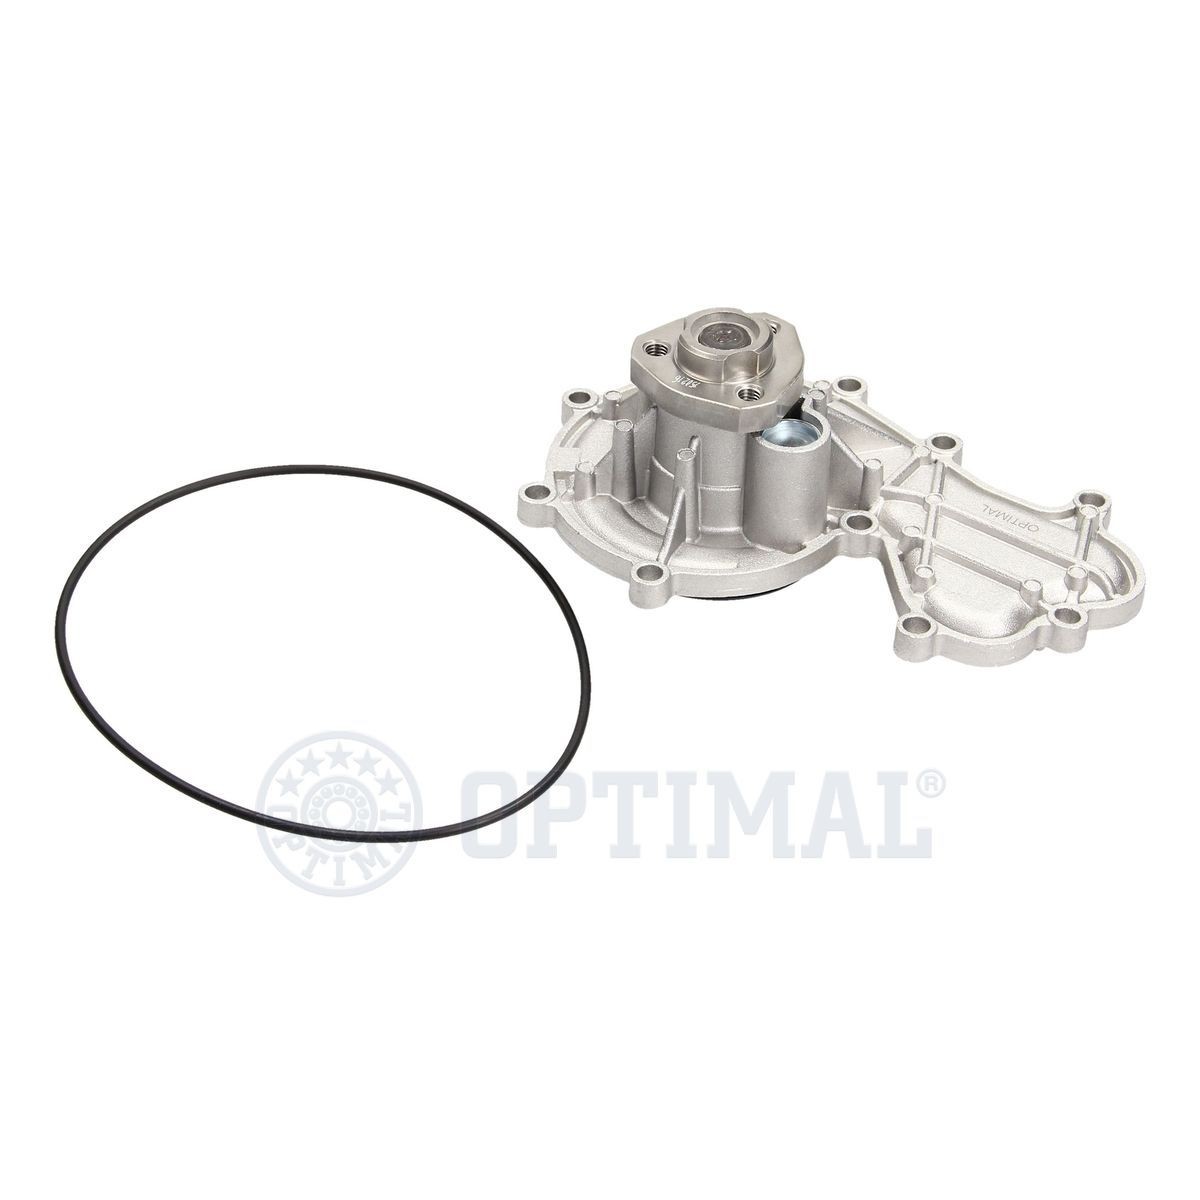 OPTIMAL with seal, Mechanical Water pumps AQ-2426 buy